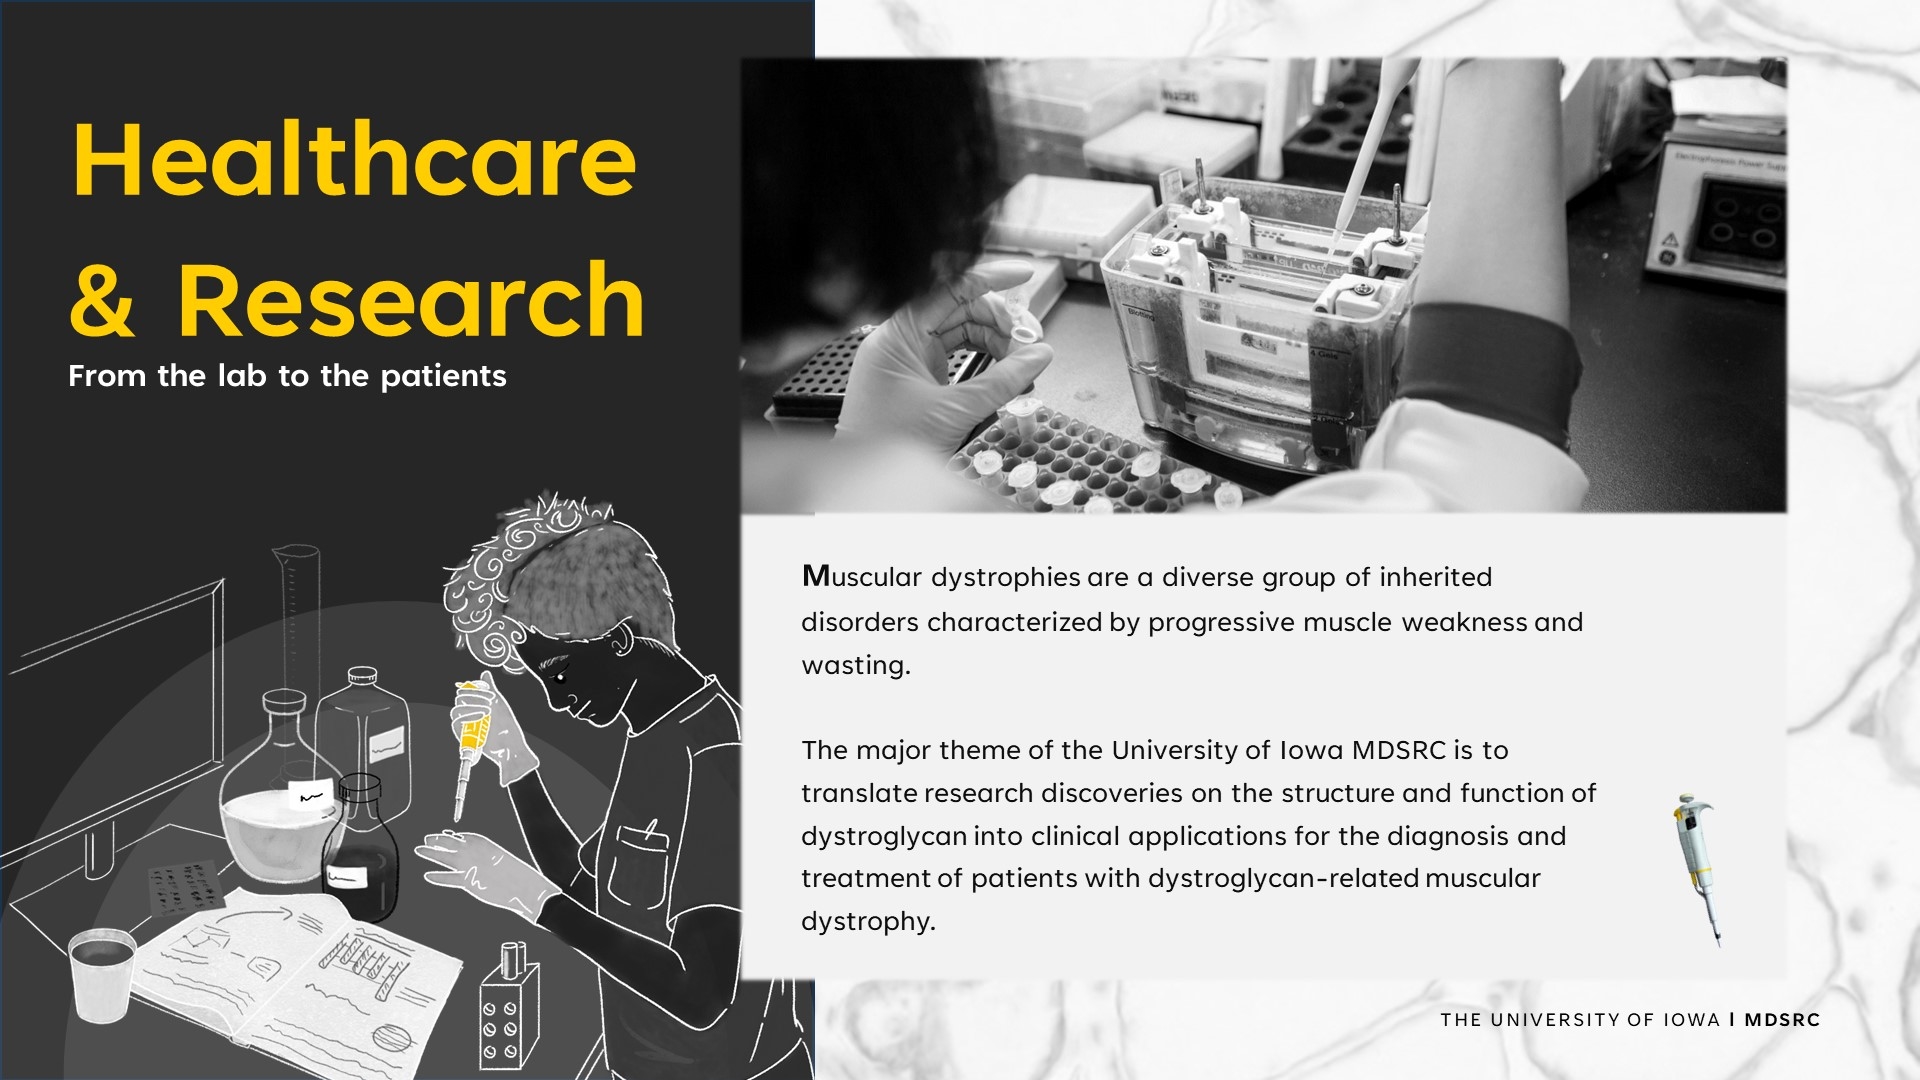 About the MDSRC Healthcare and Research, from bench to bedside